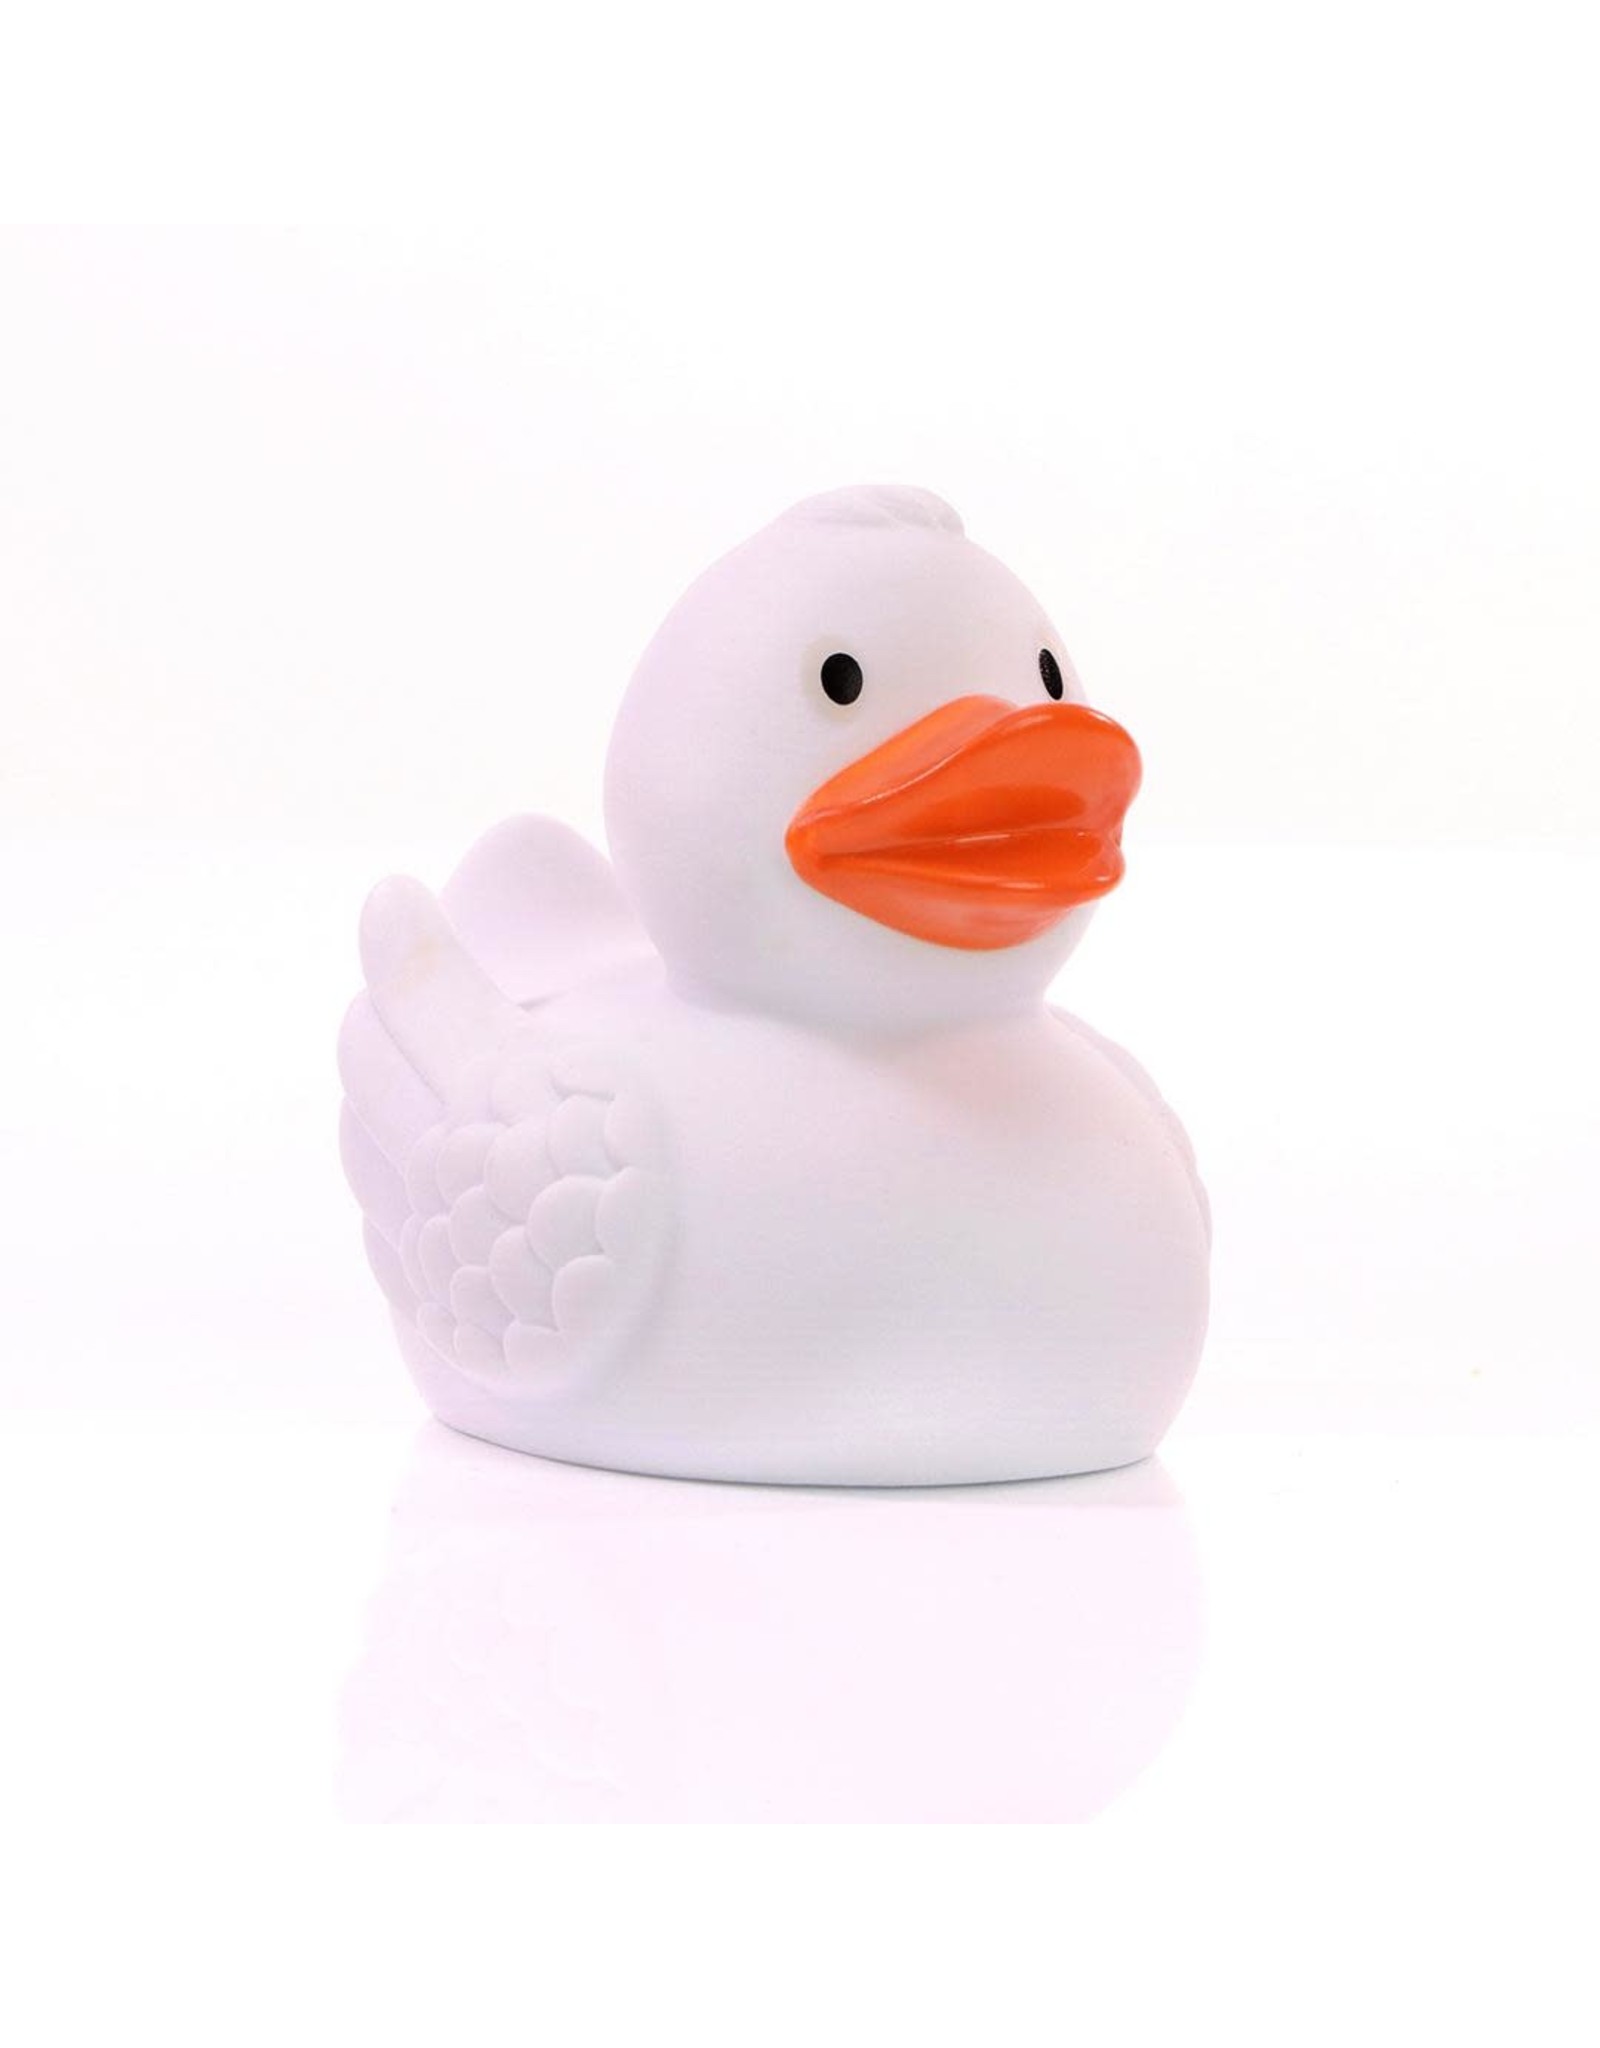 White Rubber Duck with Wings